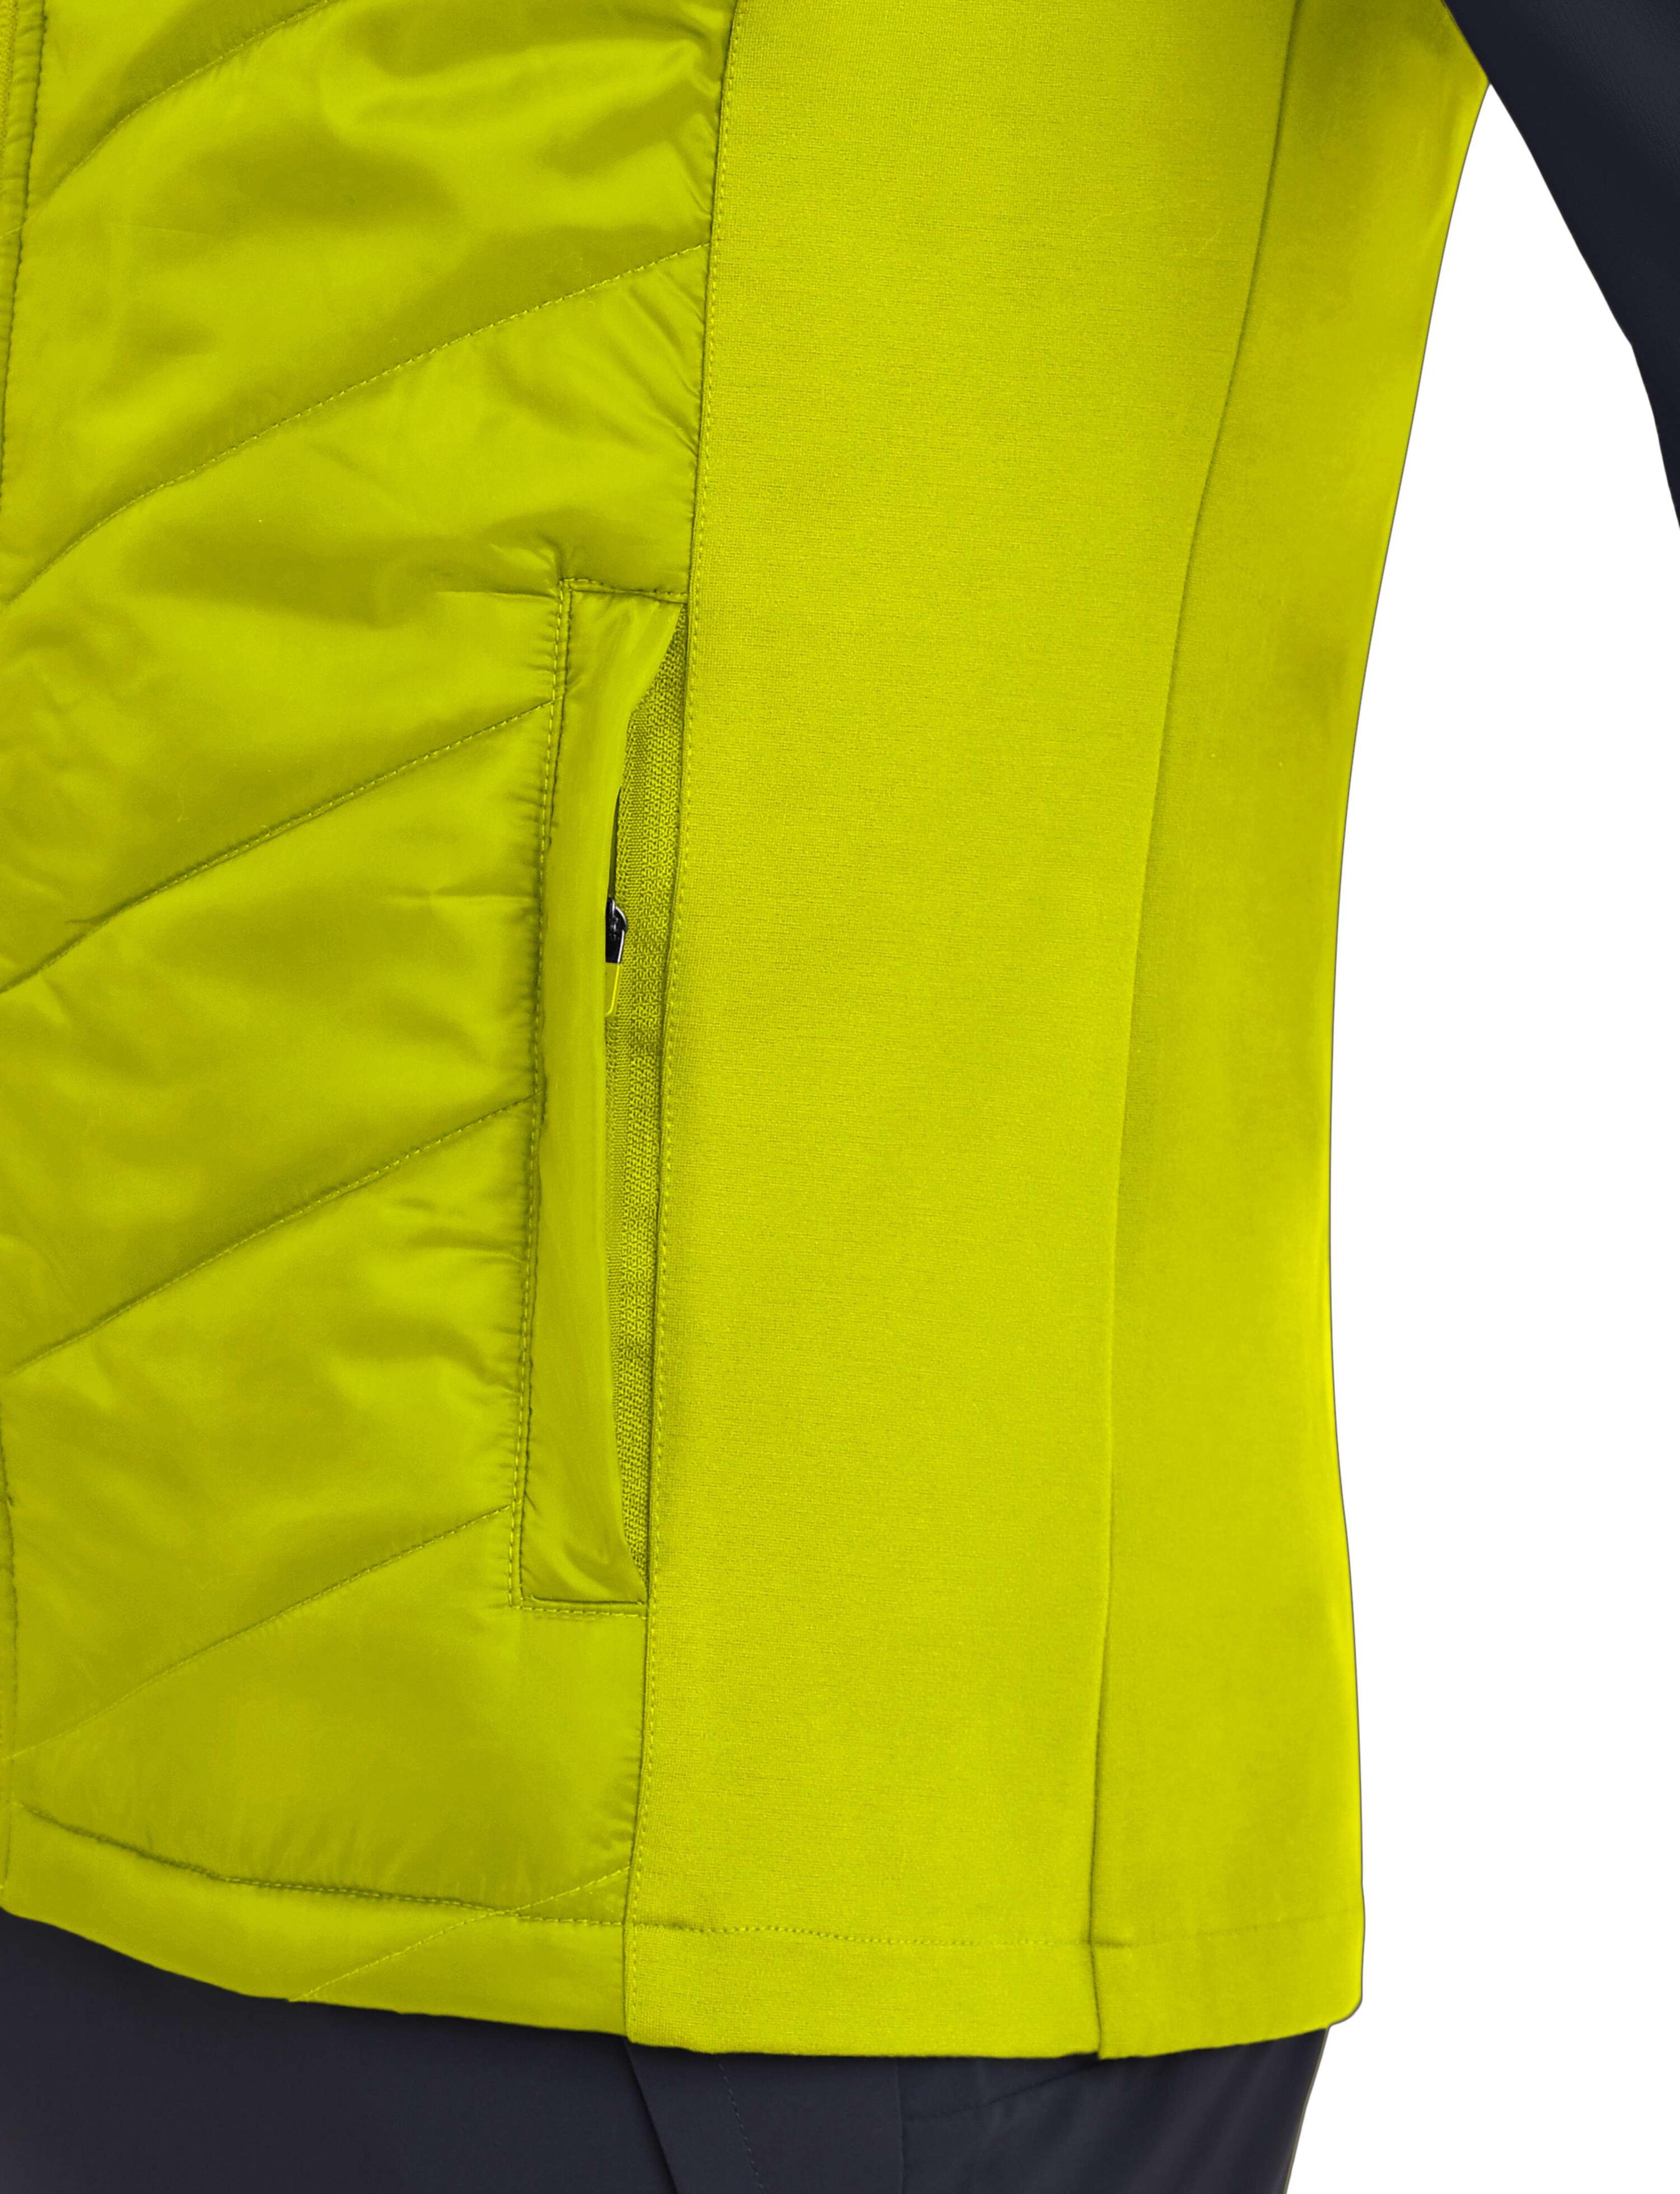 Men's Excel Winter Gilet with Zip Pockets - Lime Punch 5/5